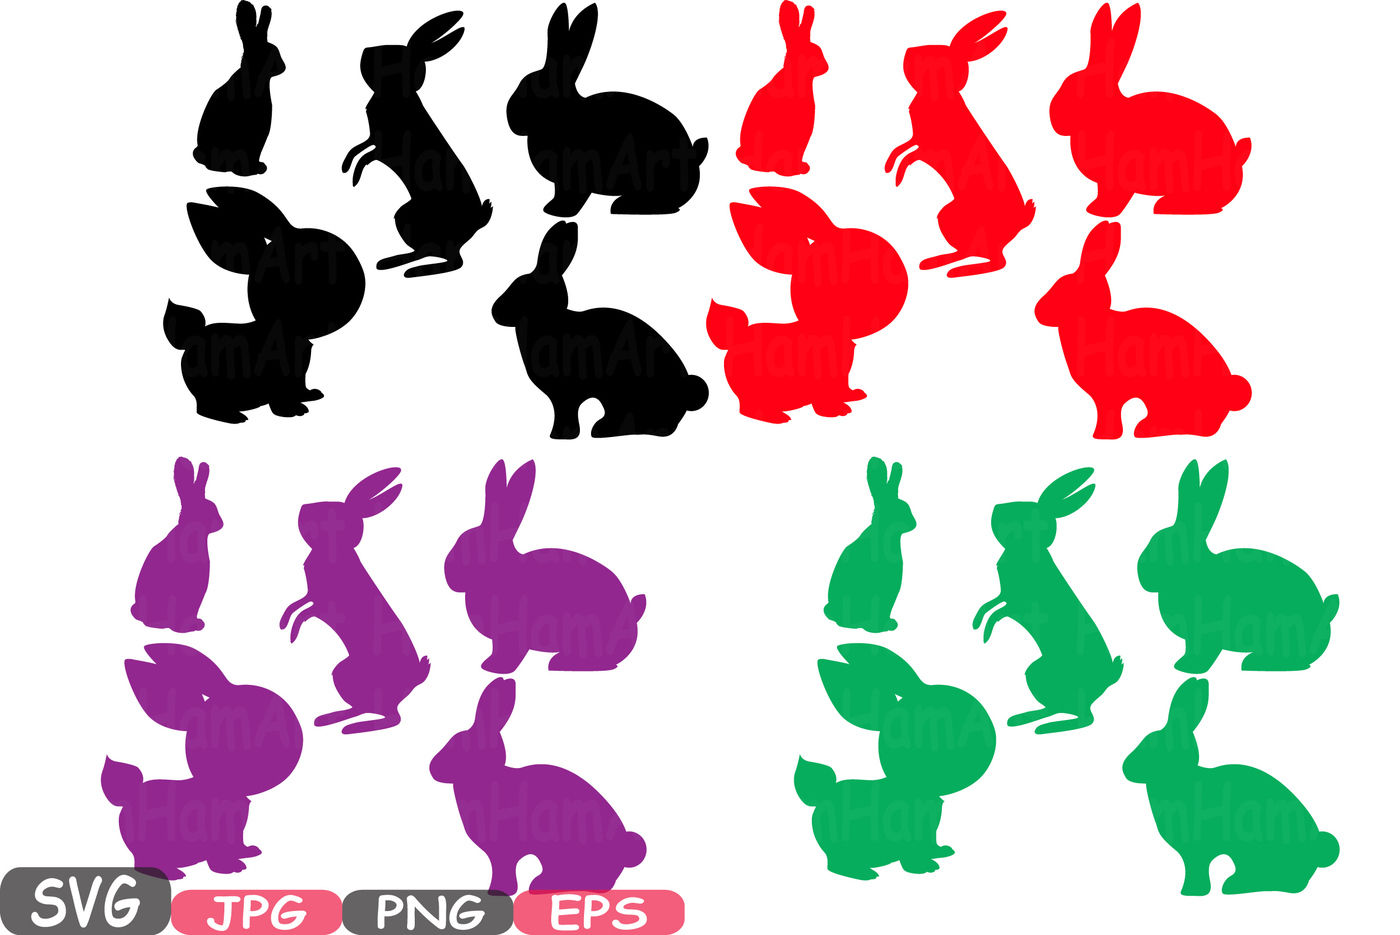 Download Easter Bunny Silhouette Svg Cutting Files Farm Clipart Svg Easter Monogram Rabbit Designs T Shirt Bunny Ears Clip Art Outline Frame 635s By Hamhamart Thehungryjpeg Com